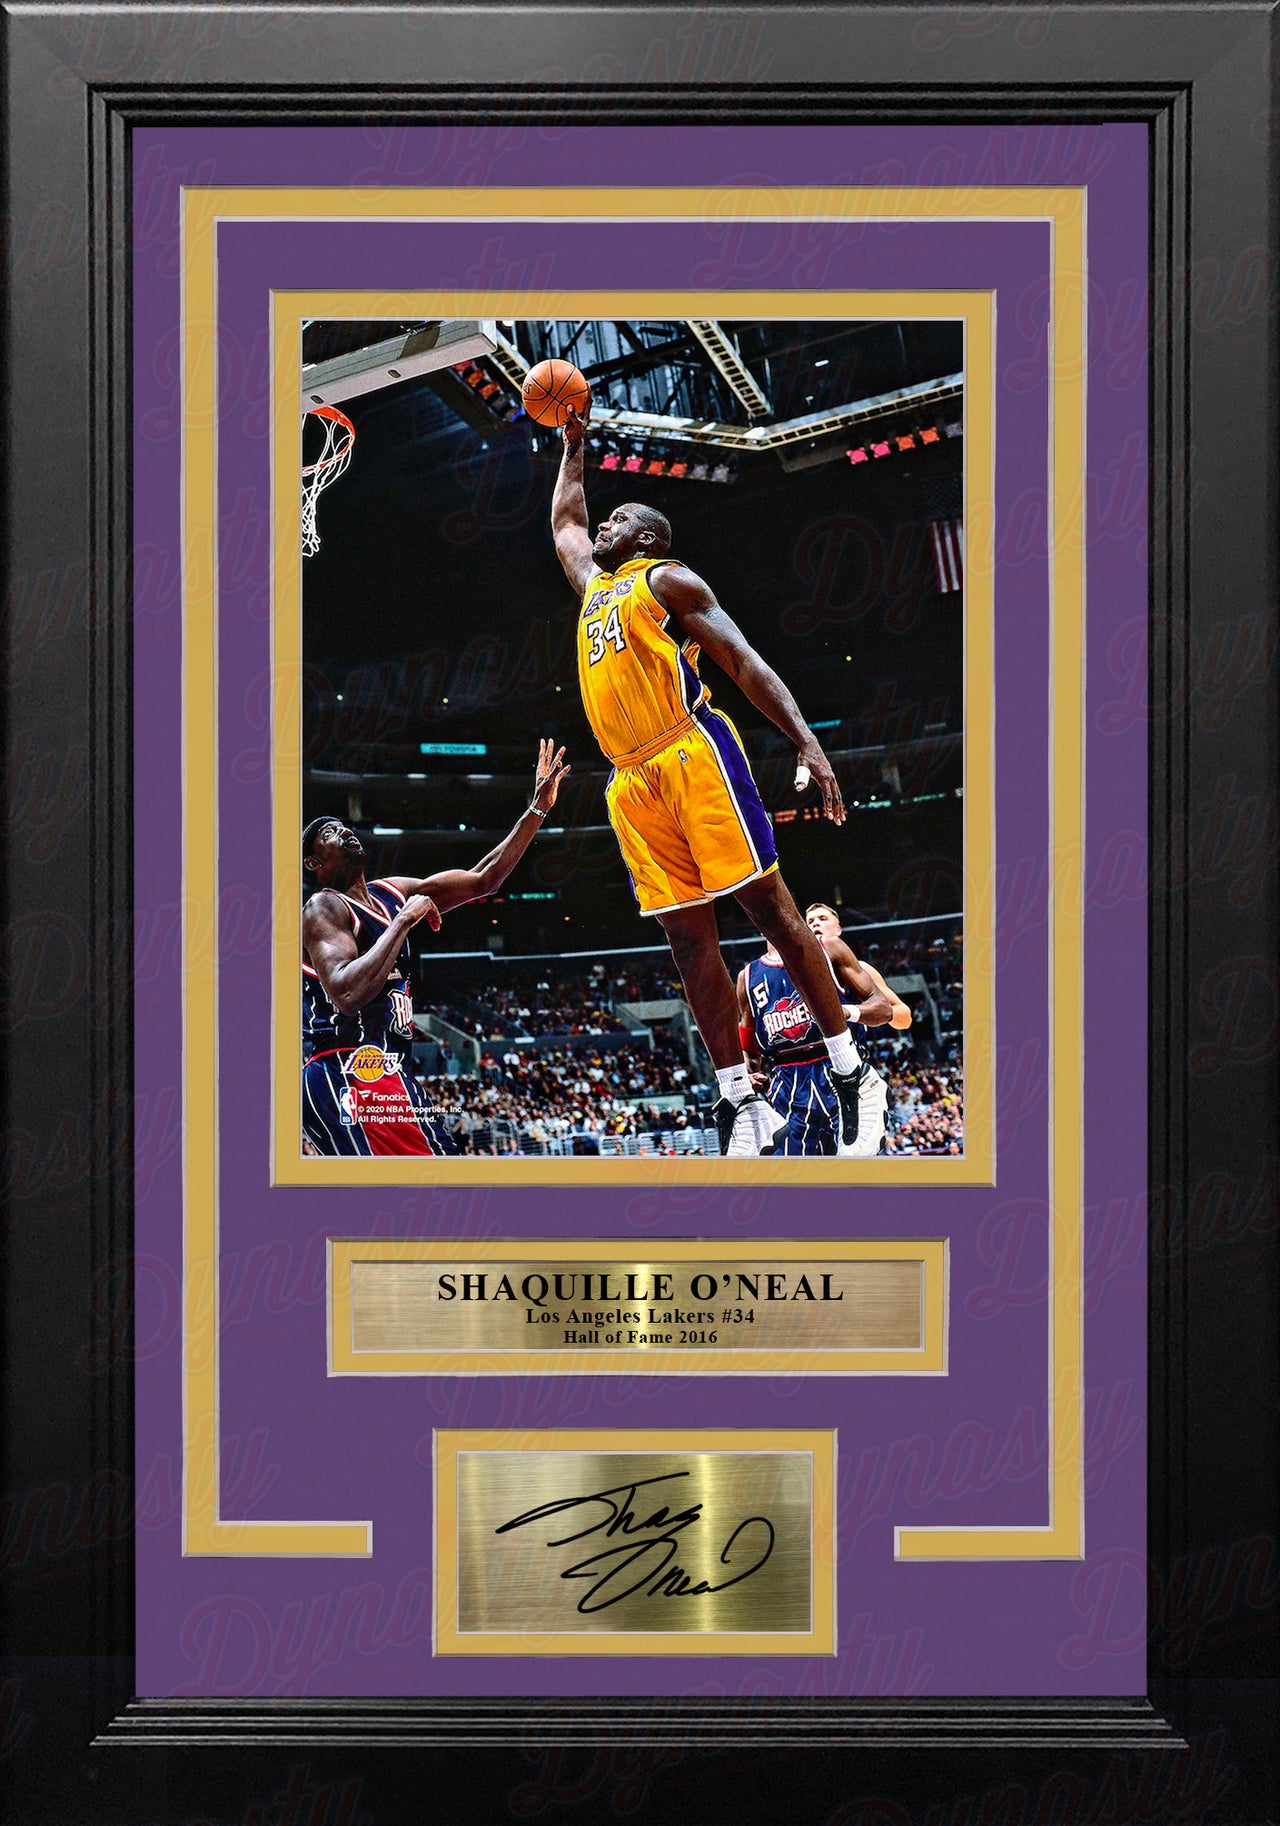 Shaquille O'Neal v. Rockets Los Angeles Lakers 8x10 Framed Basketball Photo with Engraved Autograph - Dynasty Sports & Framing 